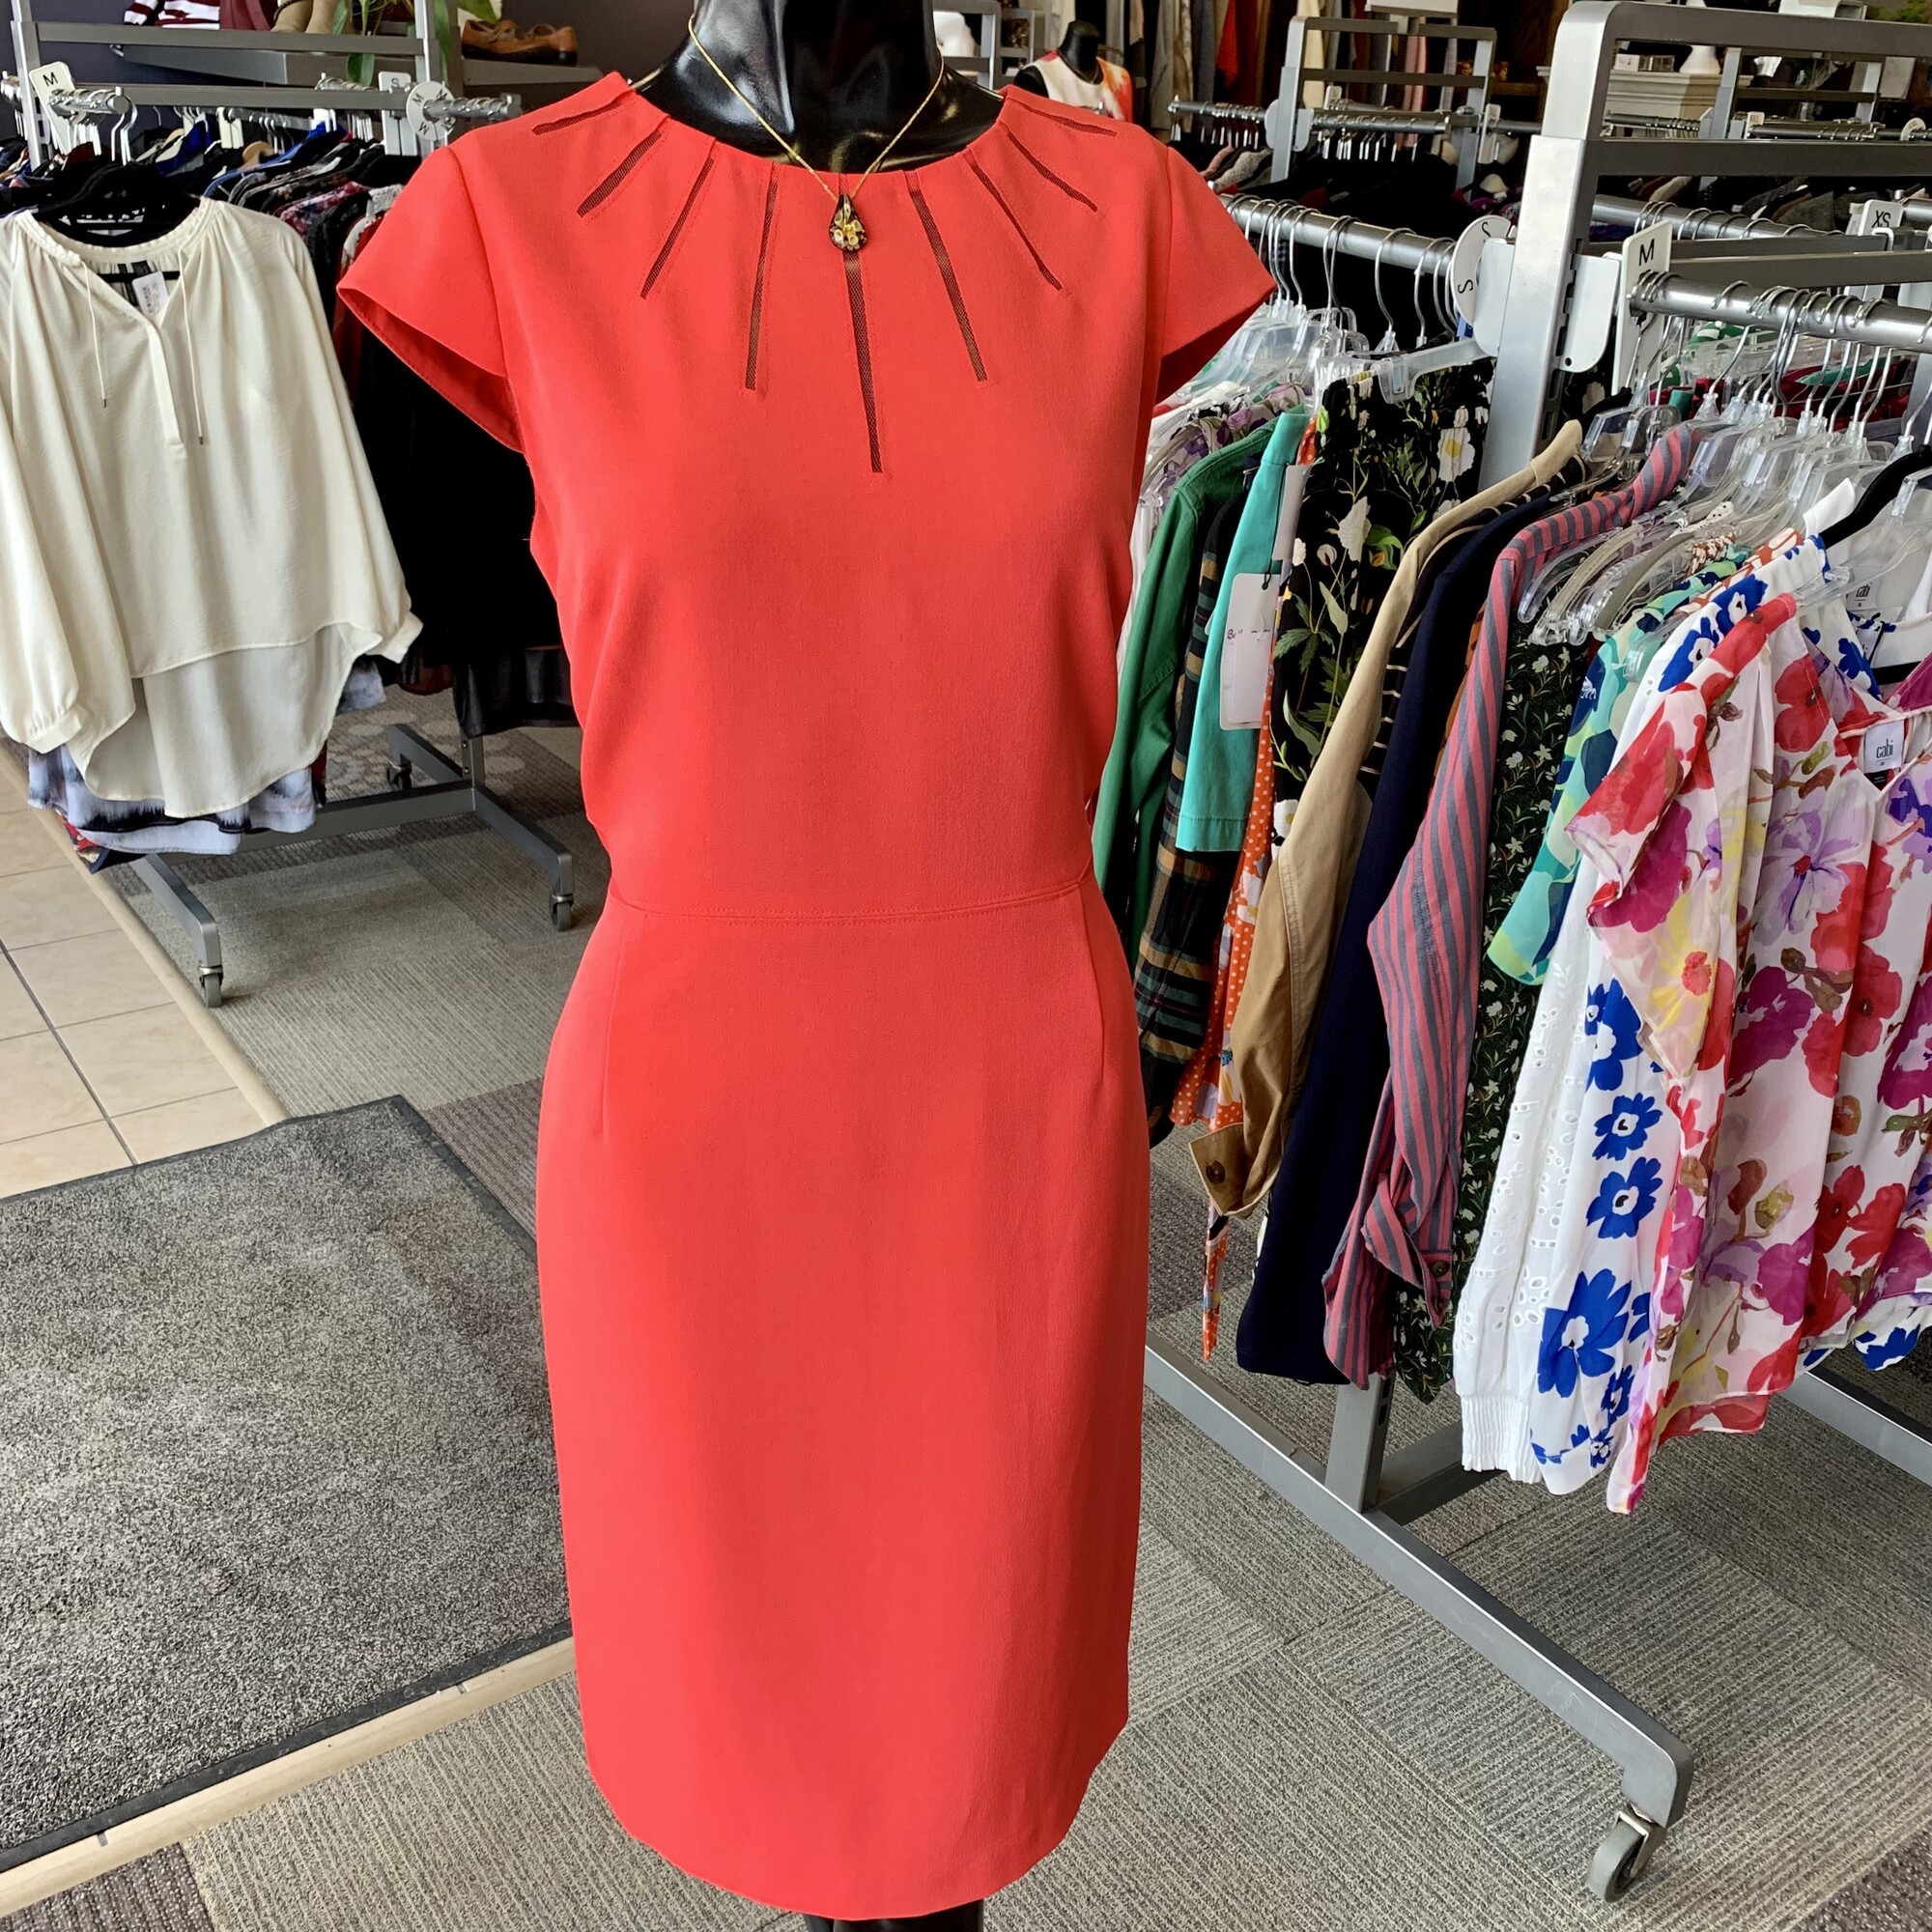 Adrianna P Dress Slvls,
Colour: Coral Red,
Size: 10,
Lined,
Great dress for occasions.